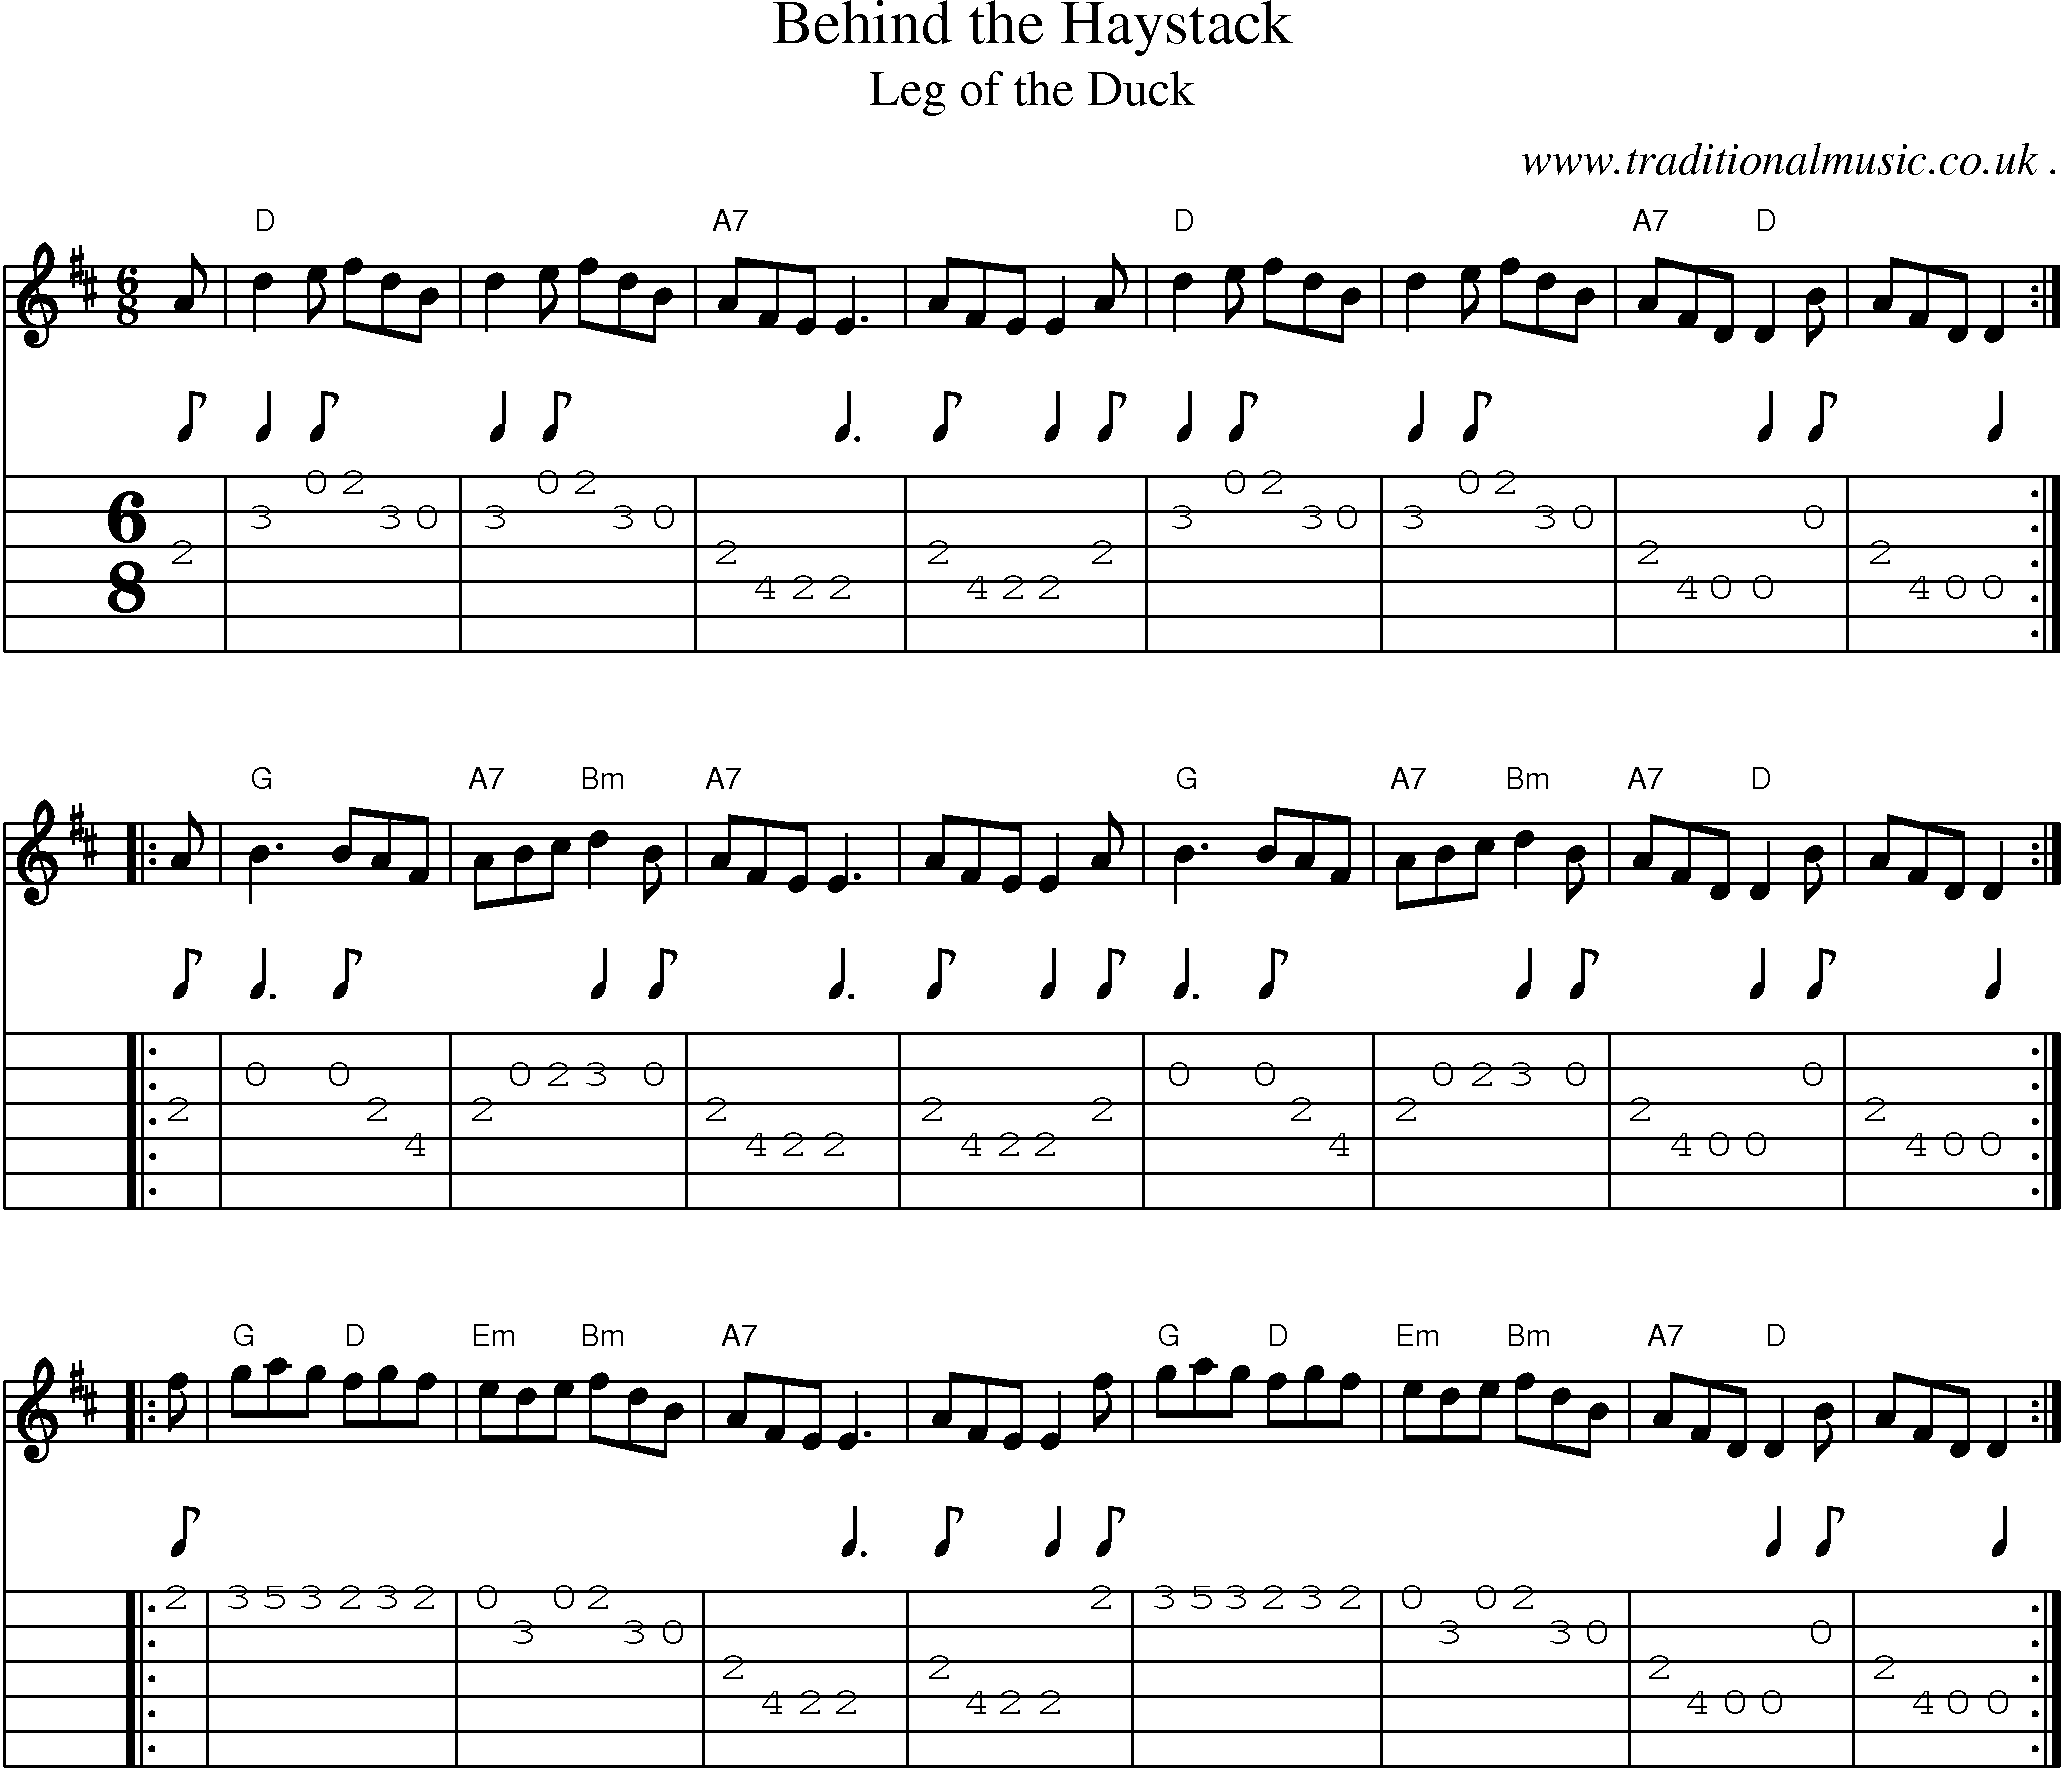 Sheet-music  score, Chords and Guitar Tabs for Behind The Haystack